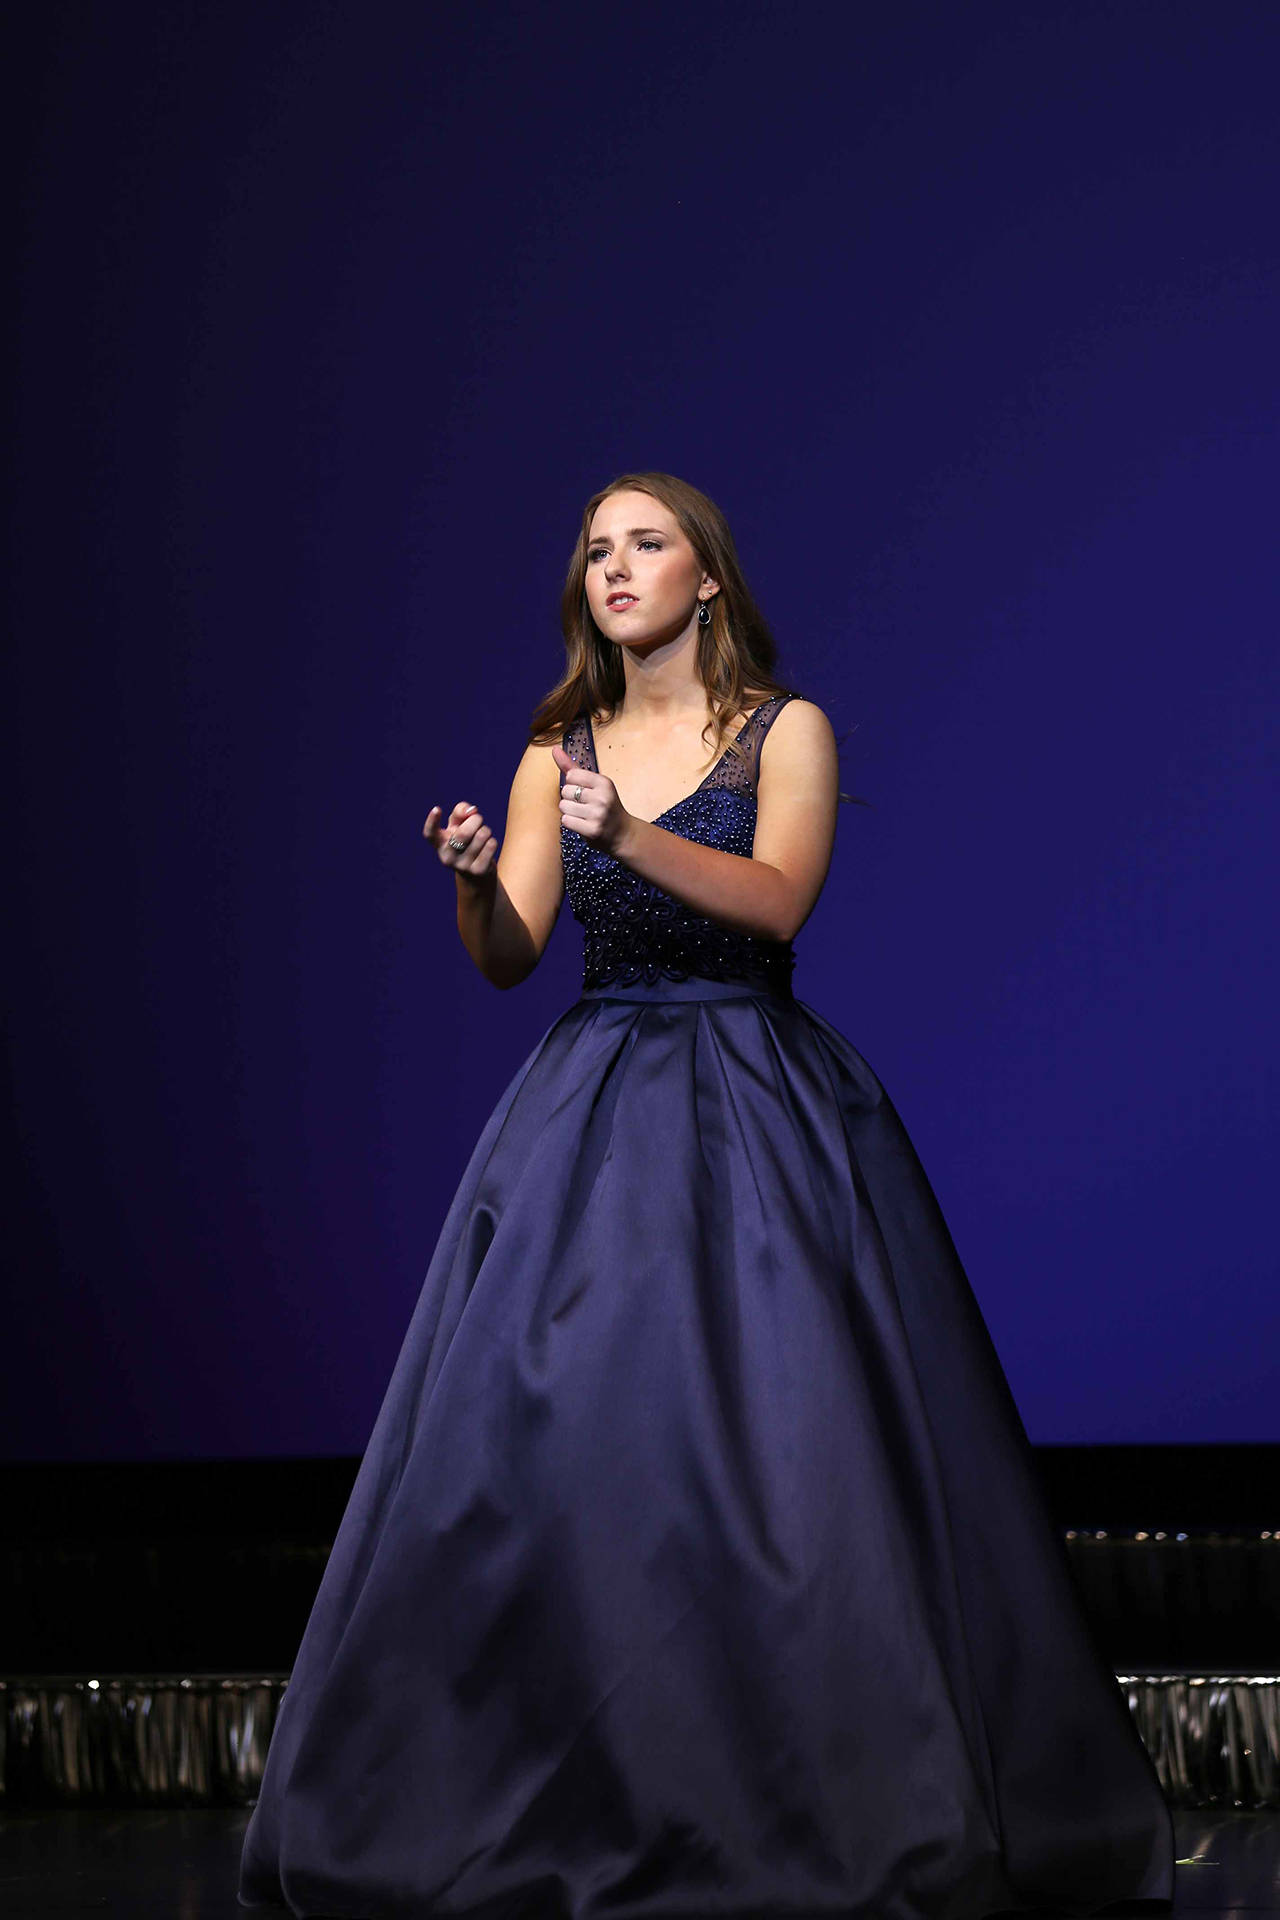 Paicyn Dragoo, a 16 year-old student at Aberdeen High, competes at the state scholarship pageant